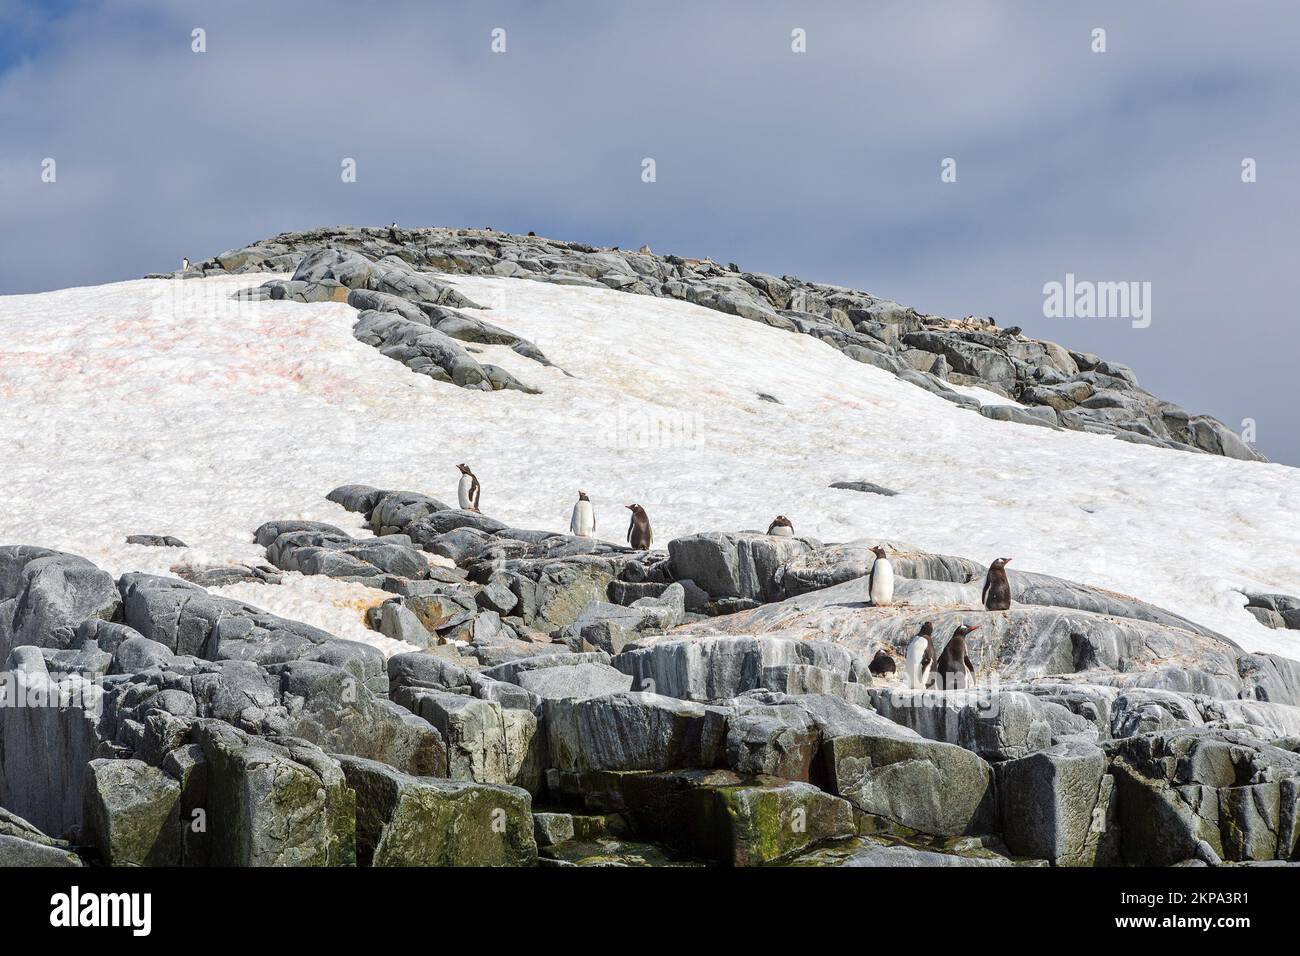 A shore of the ocean with penguins and mountains covered with snow in the background, Antarctica Stock Photo